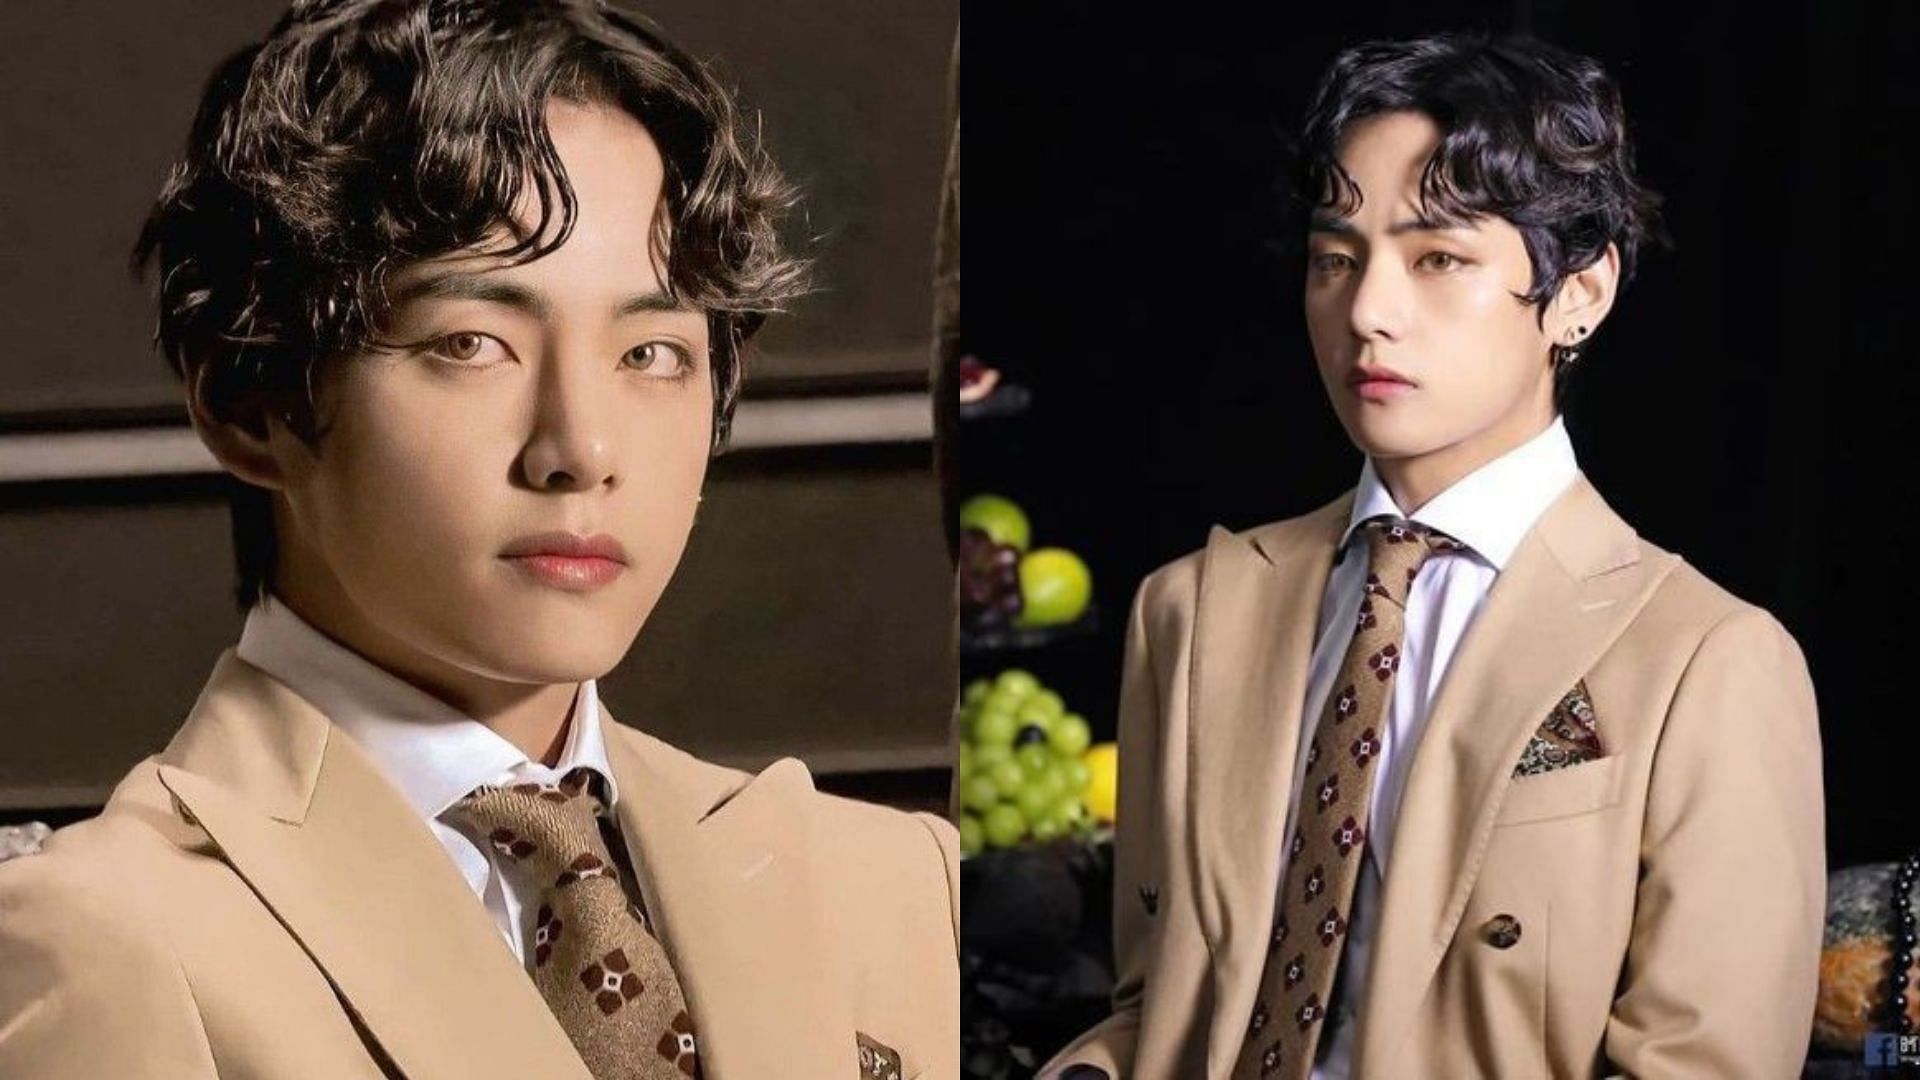 V looking more dashing than ever in his Victorian-styled suit as he poses for the MAP OF THE SOUL: 7 album concept photos (Image via Pinterest/@chny)